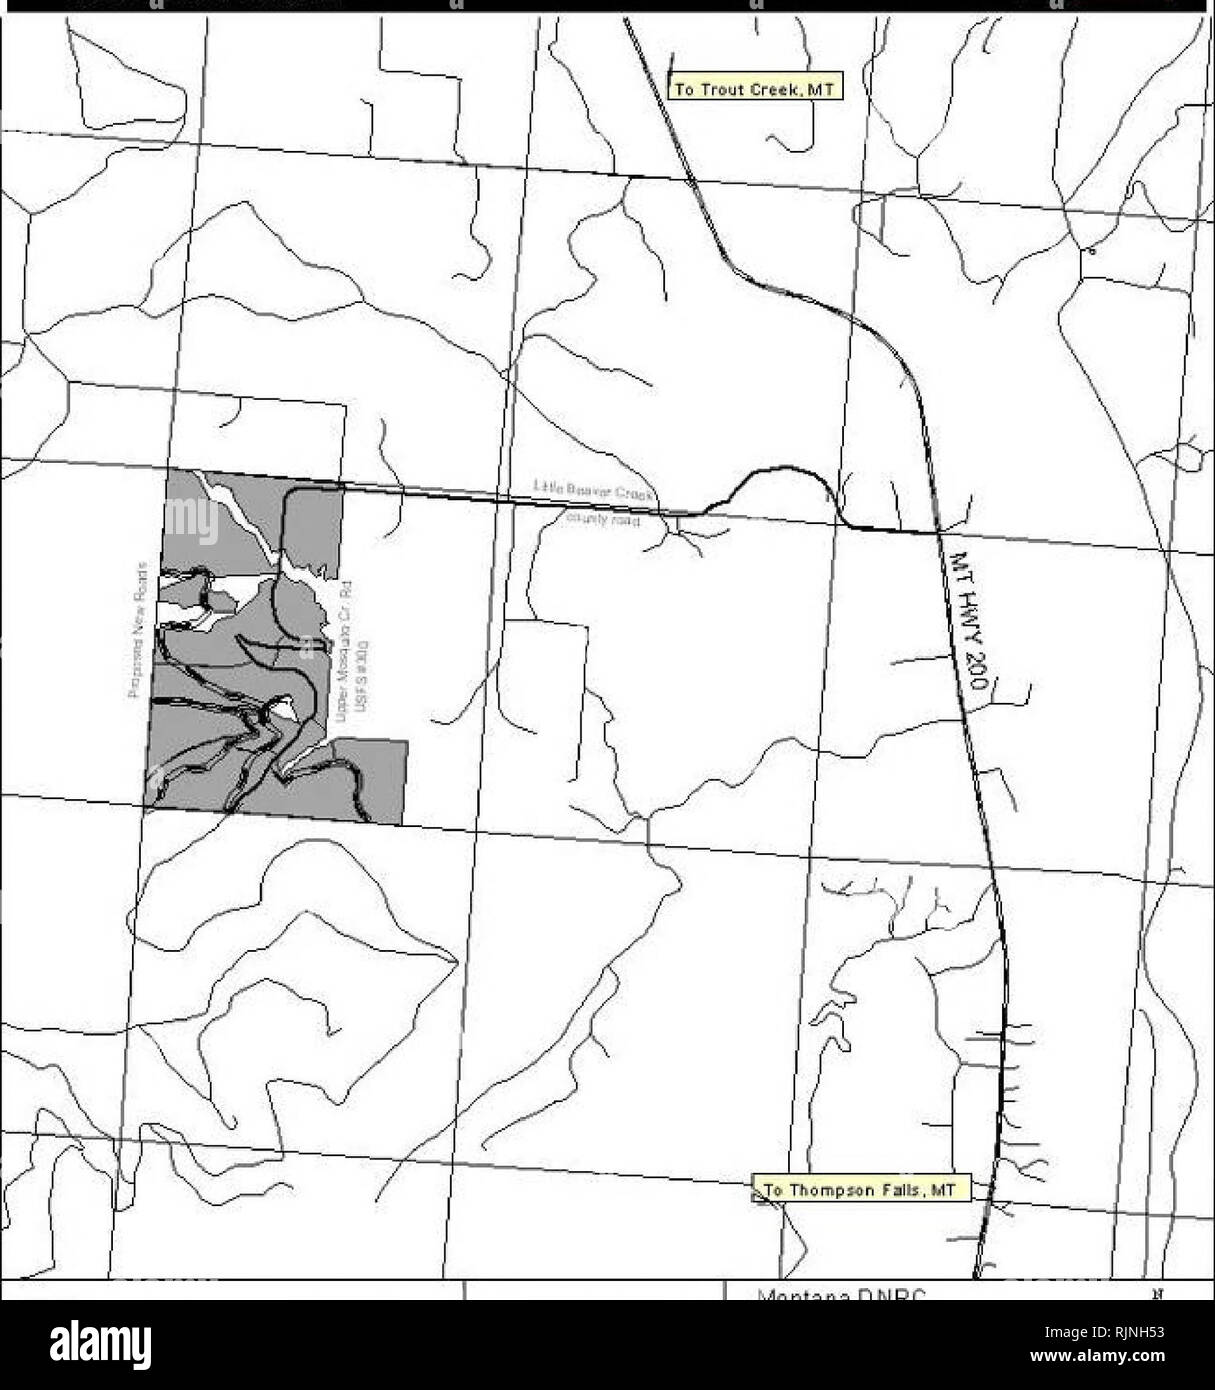 . Environmental assessment for the Mosquito Creek timber sale [electronic resource] . Forest reserves; Logging; Logging; Environmental impact analysis; Harvesting. Mosquito Creek TS, Proposed Haul Rout S16T22N R30W. Roads Hi ghw ay/County optn, UntdlM-d Optn Proposed Haul RouW Mosquilo Creek Timber Sale Montana DNRC Trust Land Management Division Northwestern Land Office * Plains Unit 8JJ 6.J ft.T* i|.f=Q | li. b - c- &quot;C re, ll&gt; t b t iIji In : *|i [ II 2 I , ^ 003 c &quot;tin L* l s at i U.n It m c-s c| i Ito C5 n o i i i lb ,cti r 18. Please note that these images are extracted fro Stock Photo